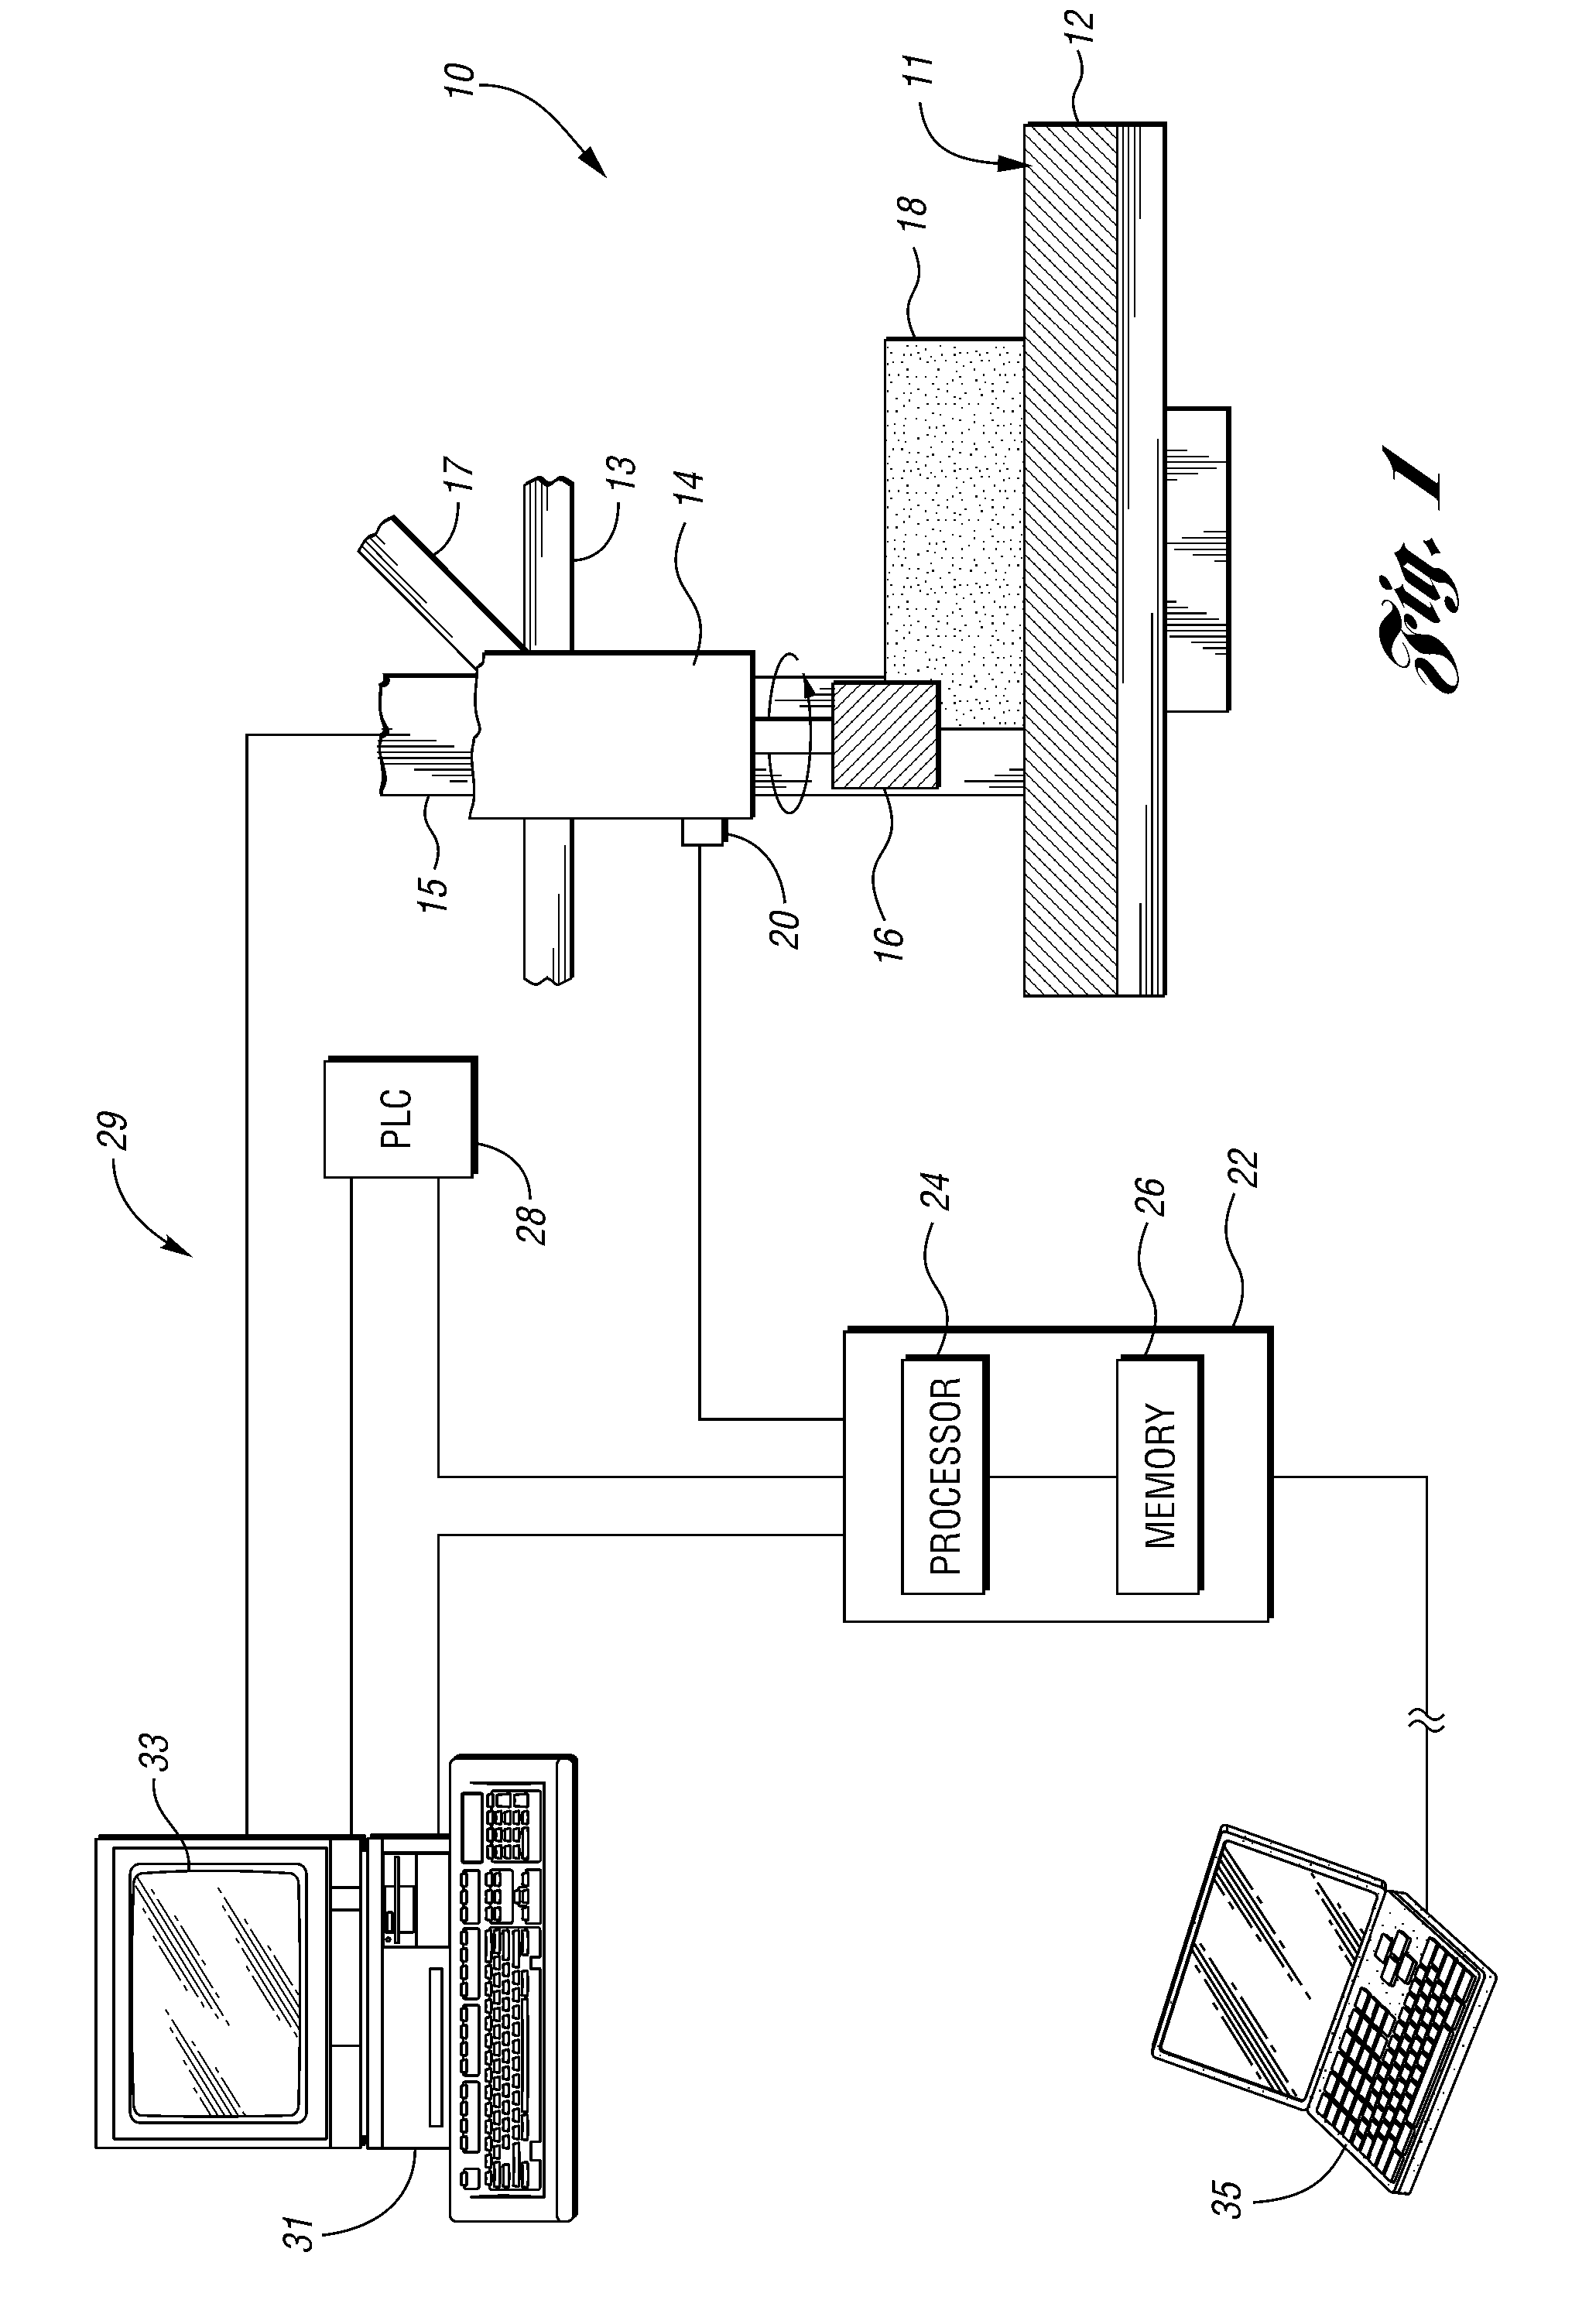 System and method for troubleshooting a machine